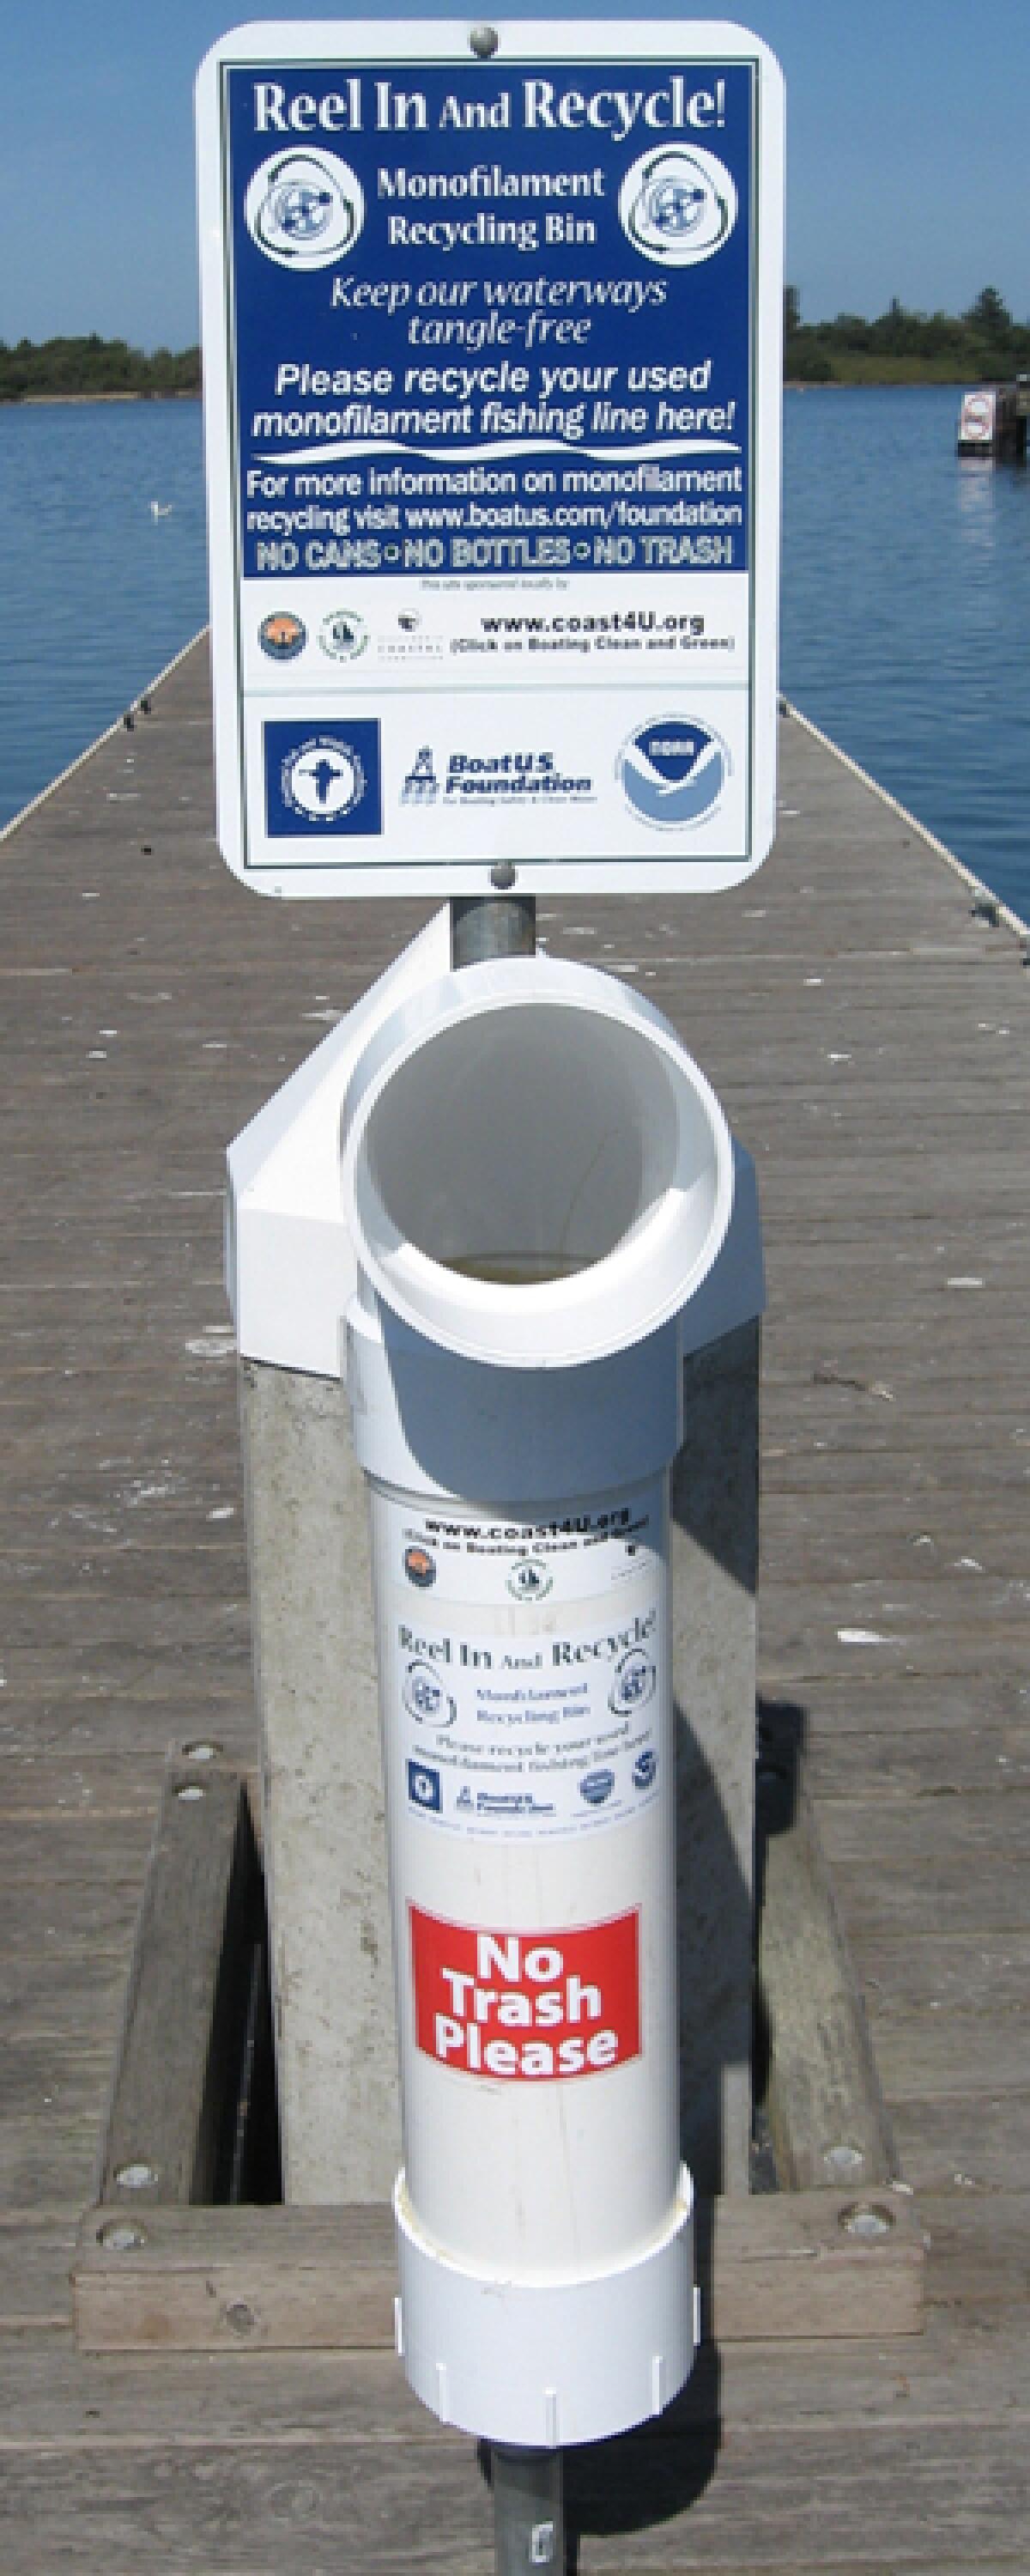 Proposal for Ocean Beach Pier seeks places to put discarded fishing lines -  Point Loma & OB Monthly